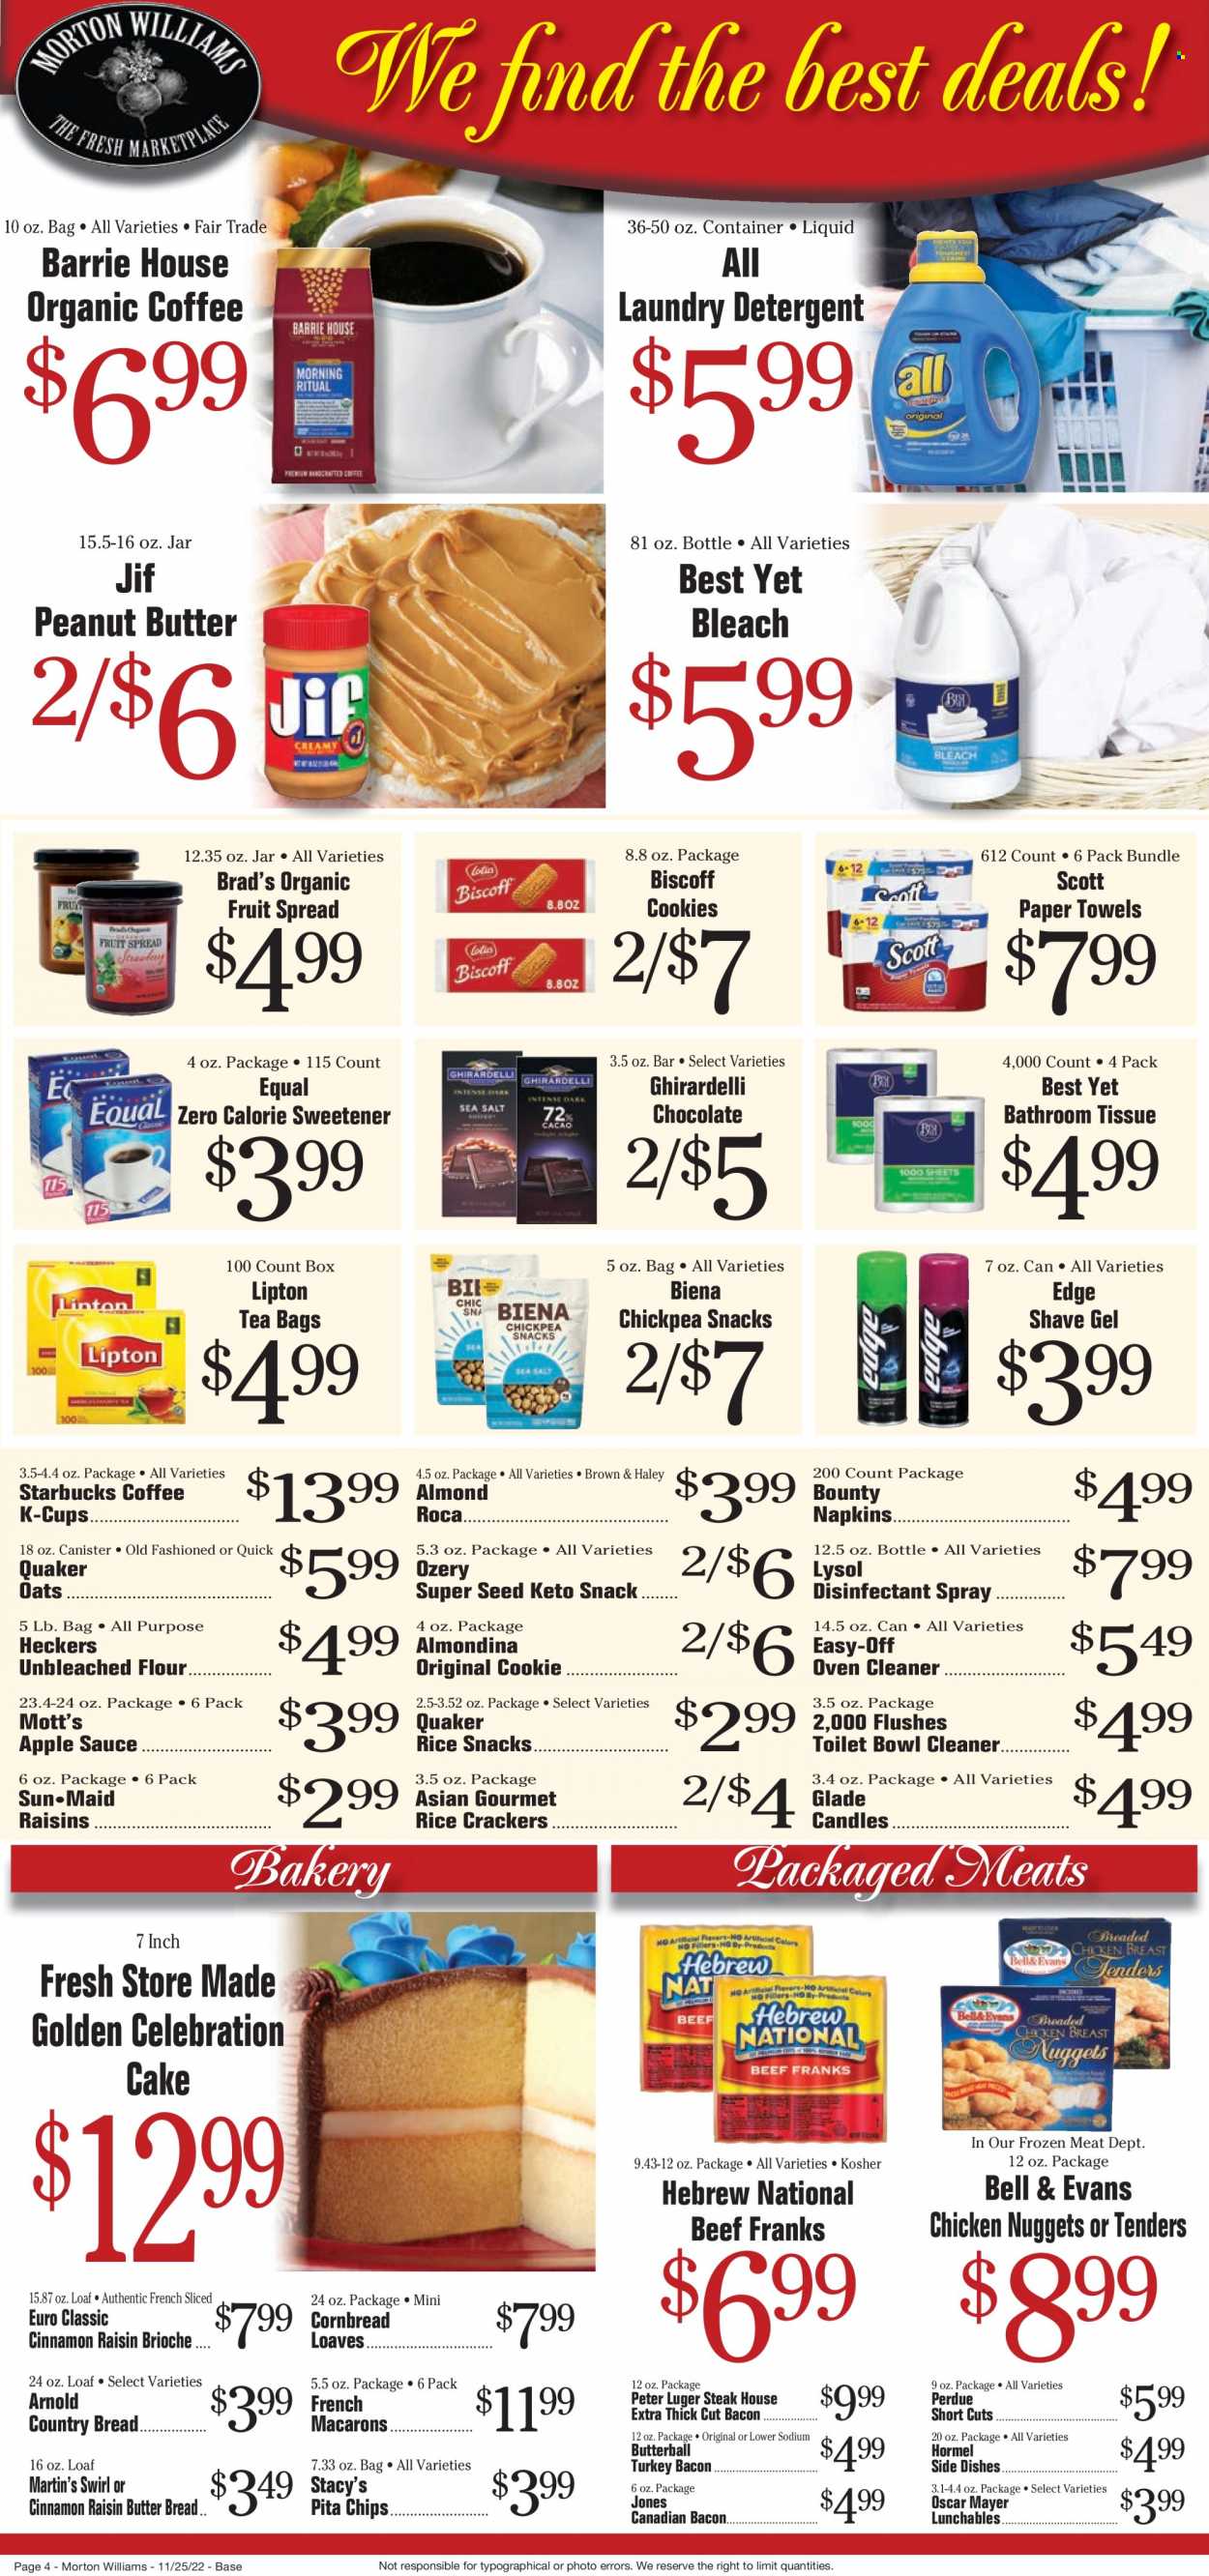 thumbnail - Morton Williams Flyer - 11/25/2022 - 12/01/2022 - Sales products - bread, cake, corn bread, brioche, macaroons, Mott's, chicken tenders, nuggets, sauce, fried chicken, chicken nuggets, Quaker, Perdue®, Lunchables, Hormel, bacon, Butterball, canadian bacon, turkey bacon, Oscar Mayer, cookies, chocolate, snack, Bounty, Celebration, crackers, Ghirardelli, rice crackers, pita chips, flour, oats, sweetener, apple sauce, peanut butter, Jif, raisins, Lipton, tea bags, Starbucks, organic coffee, coffee capsules, K-Cups, steak. Page 4.